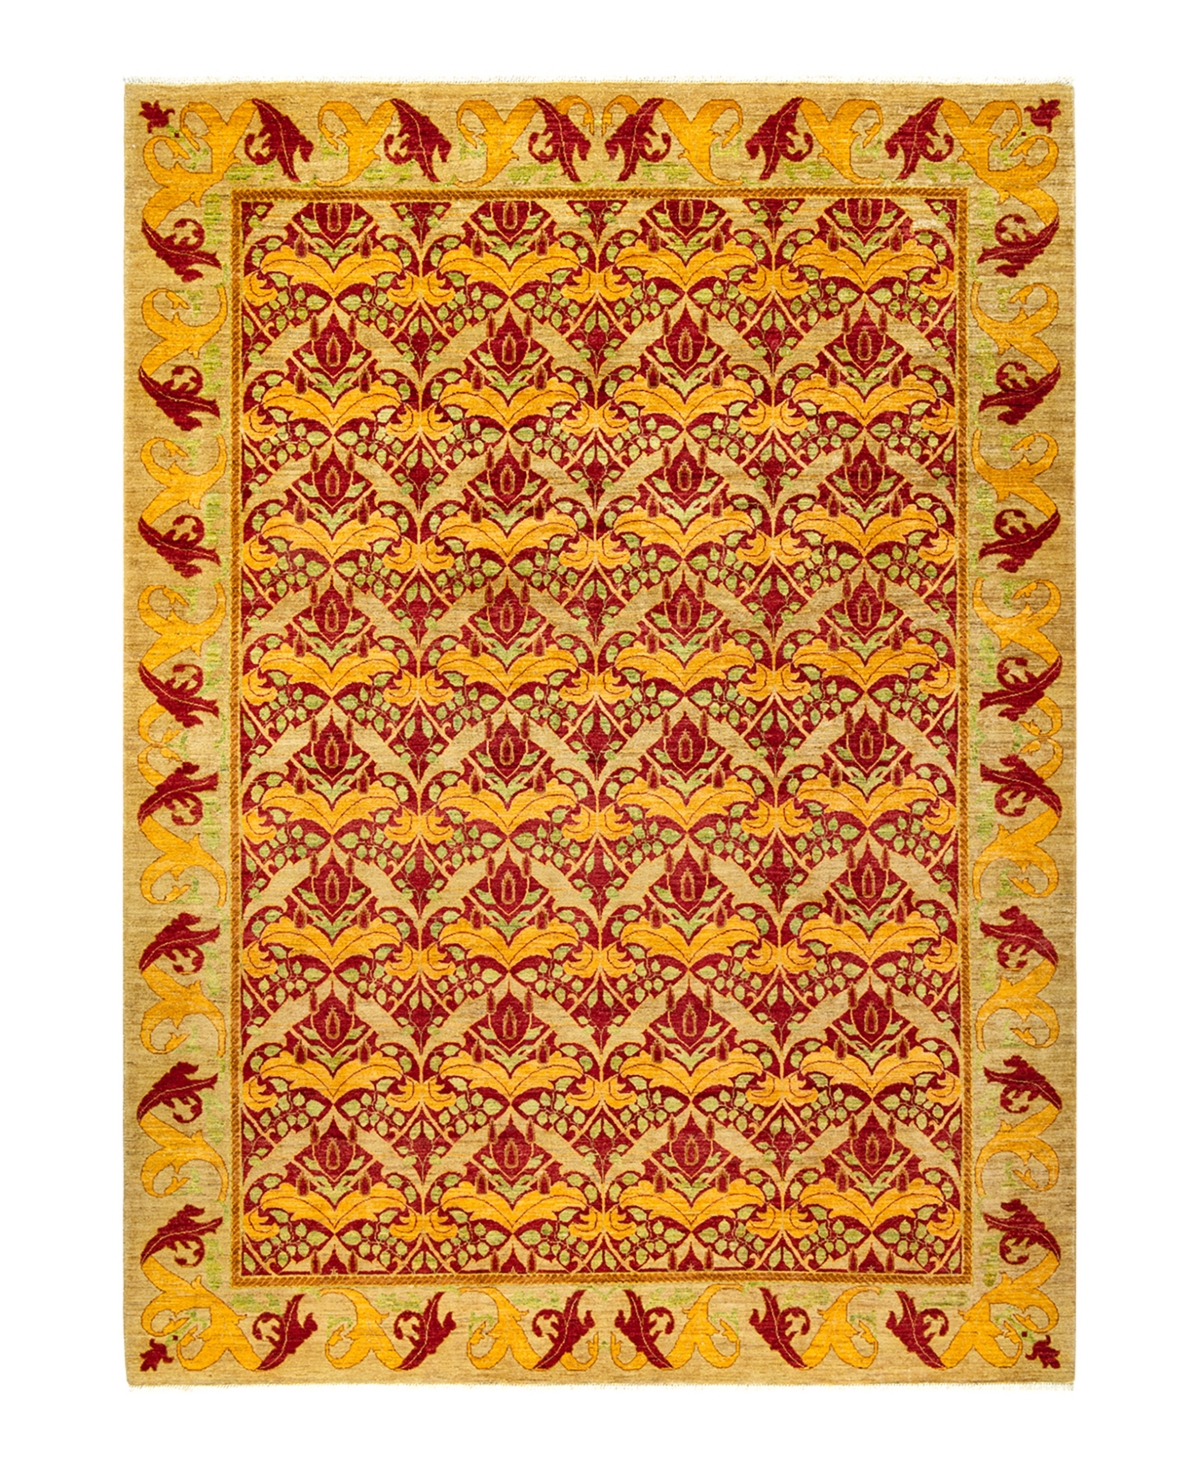 Adorn Hand Woven Rugs Arts Crafts M1583 9' x 11'10in Area Rug - Red